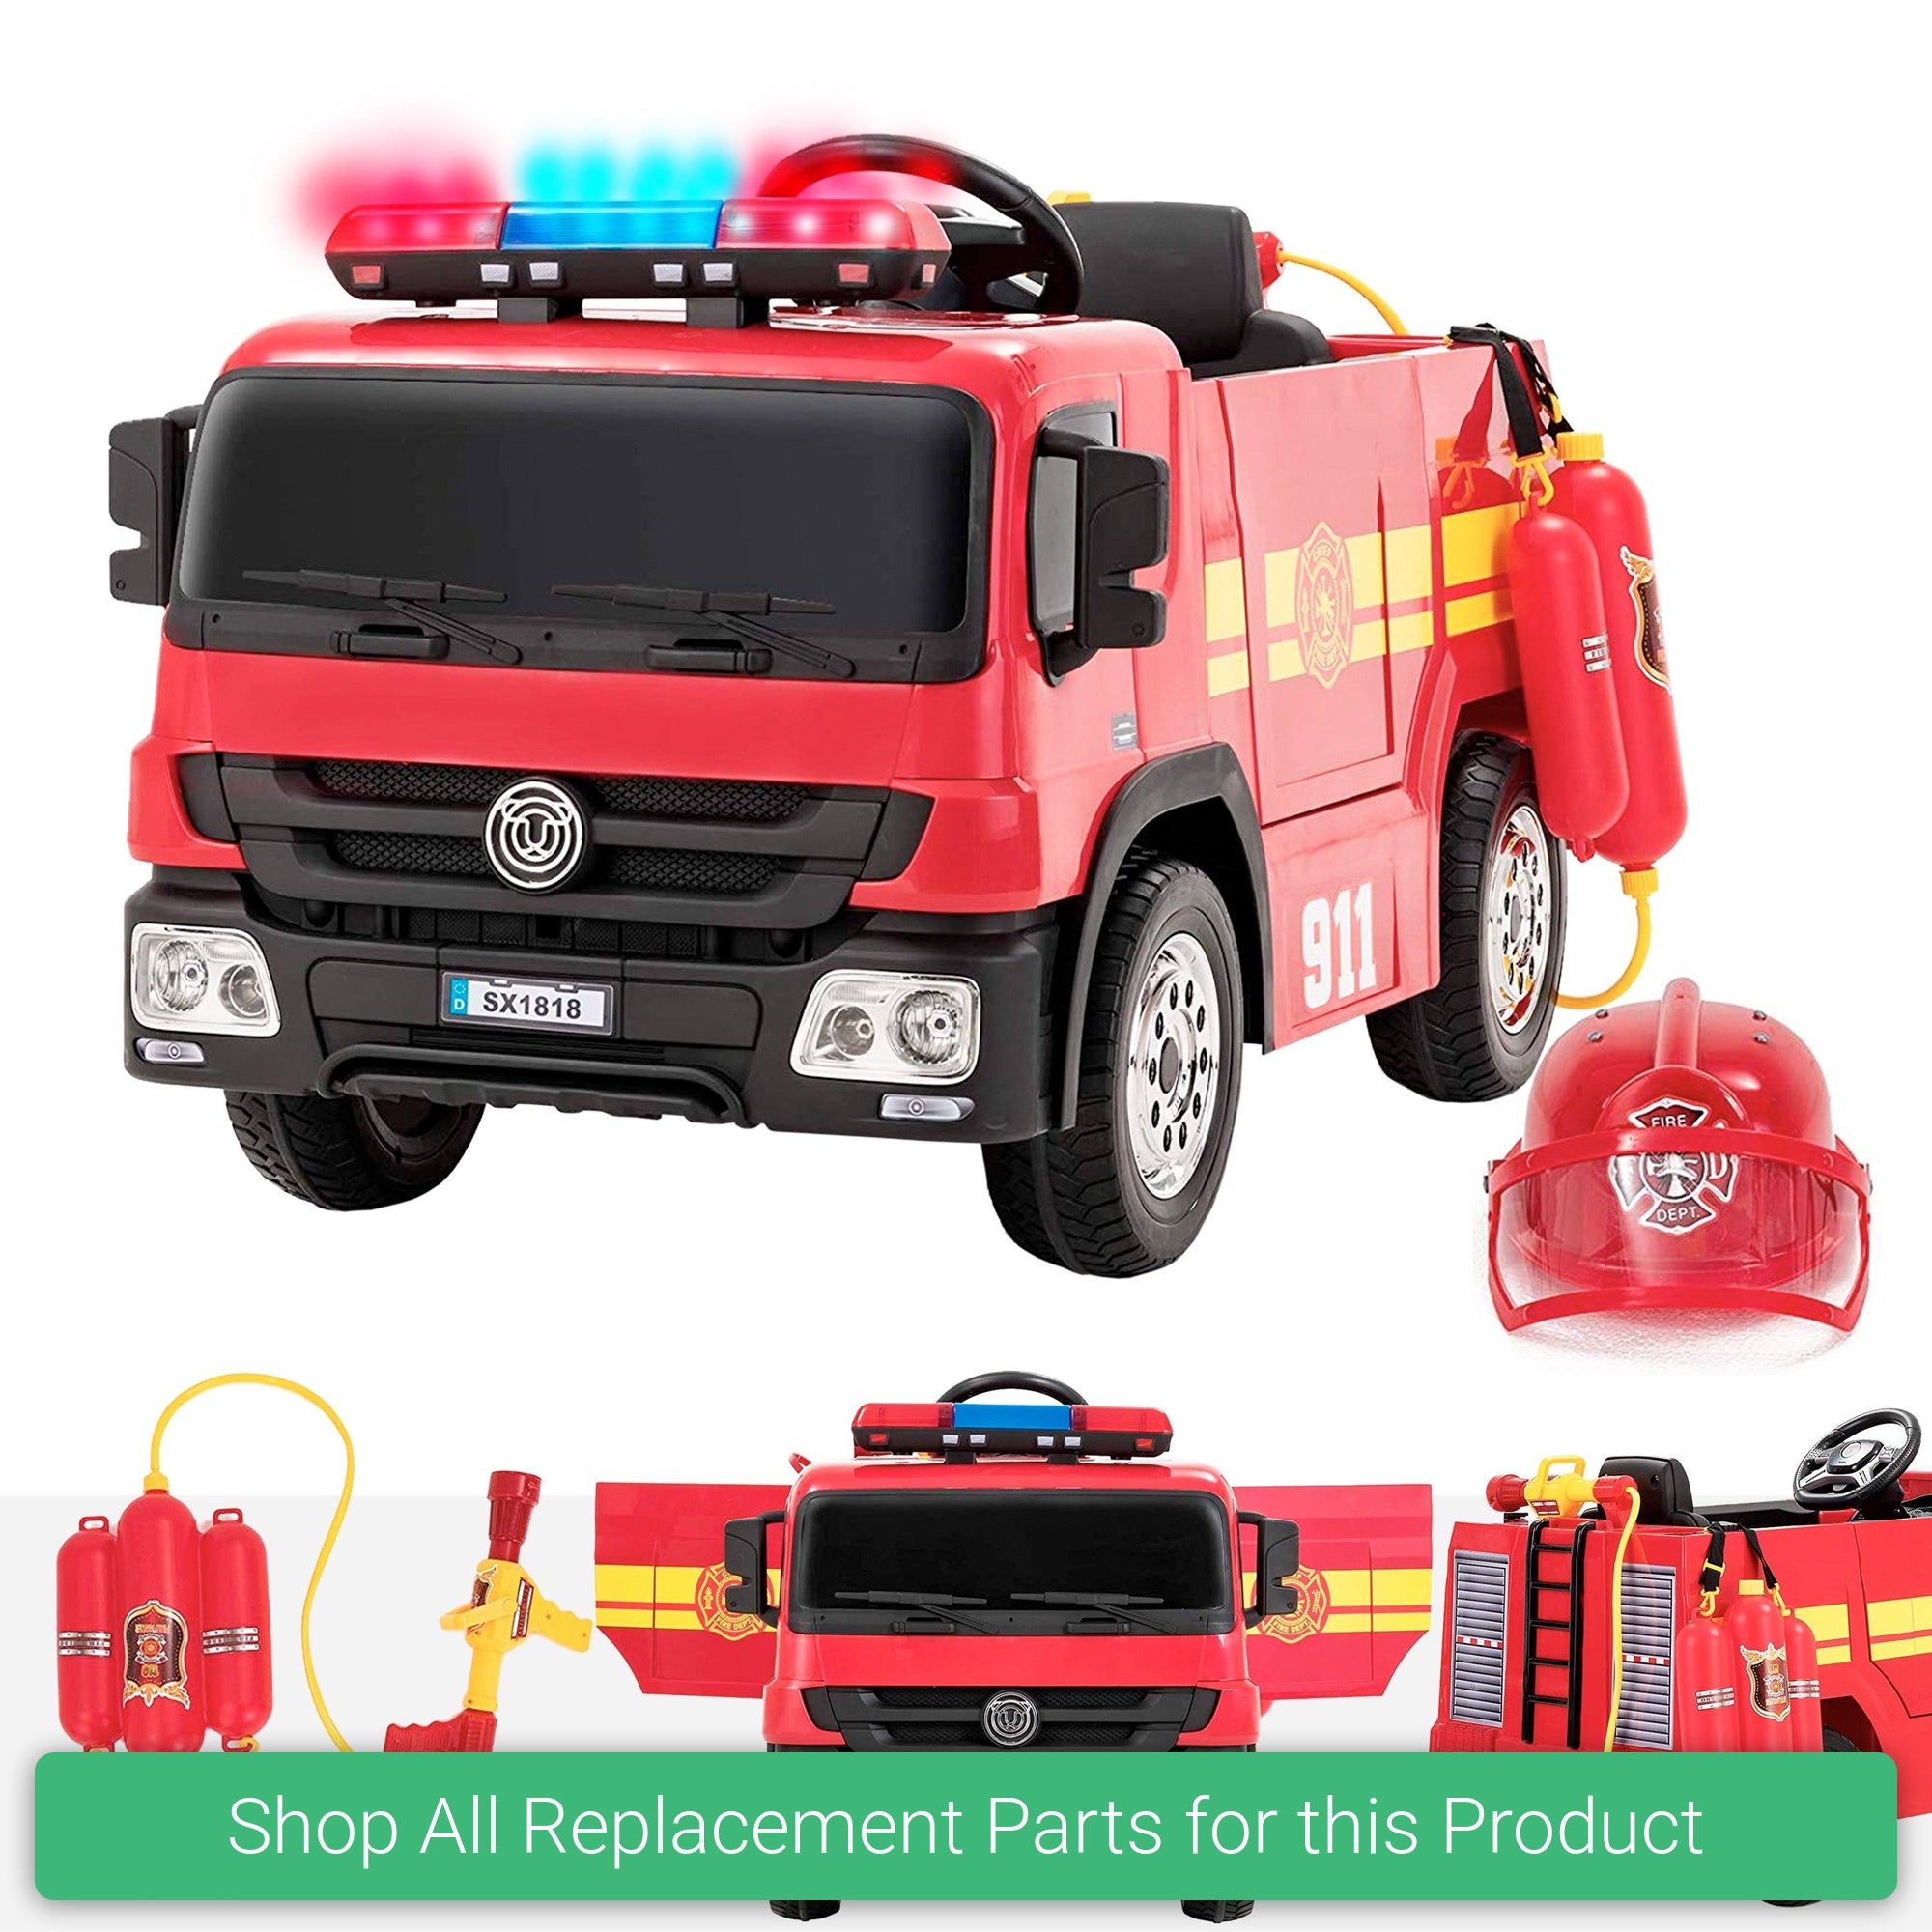 Replacement Parts and Spares for Kids Fire Engine - FIR-ENG-5 - SX1818